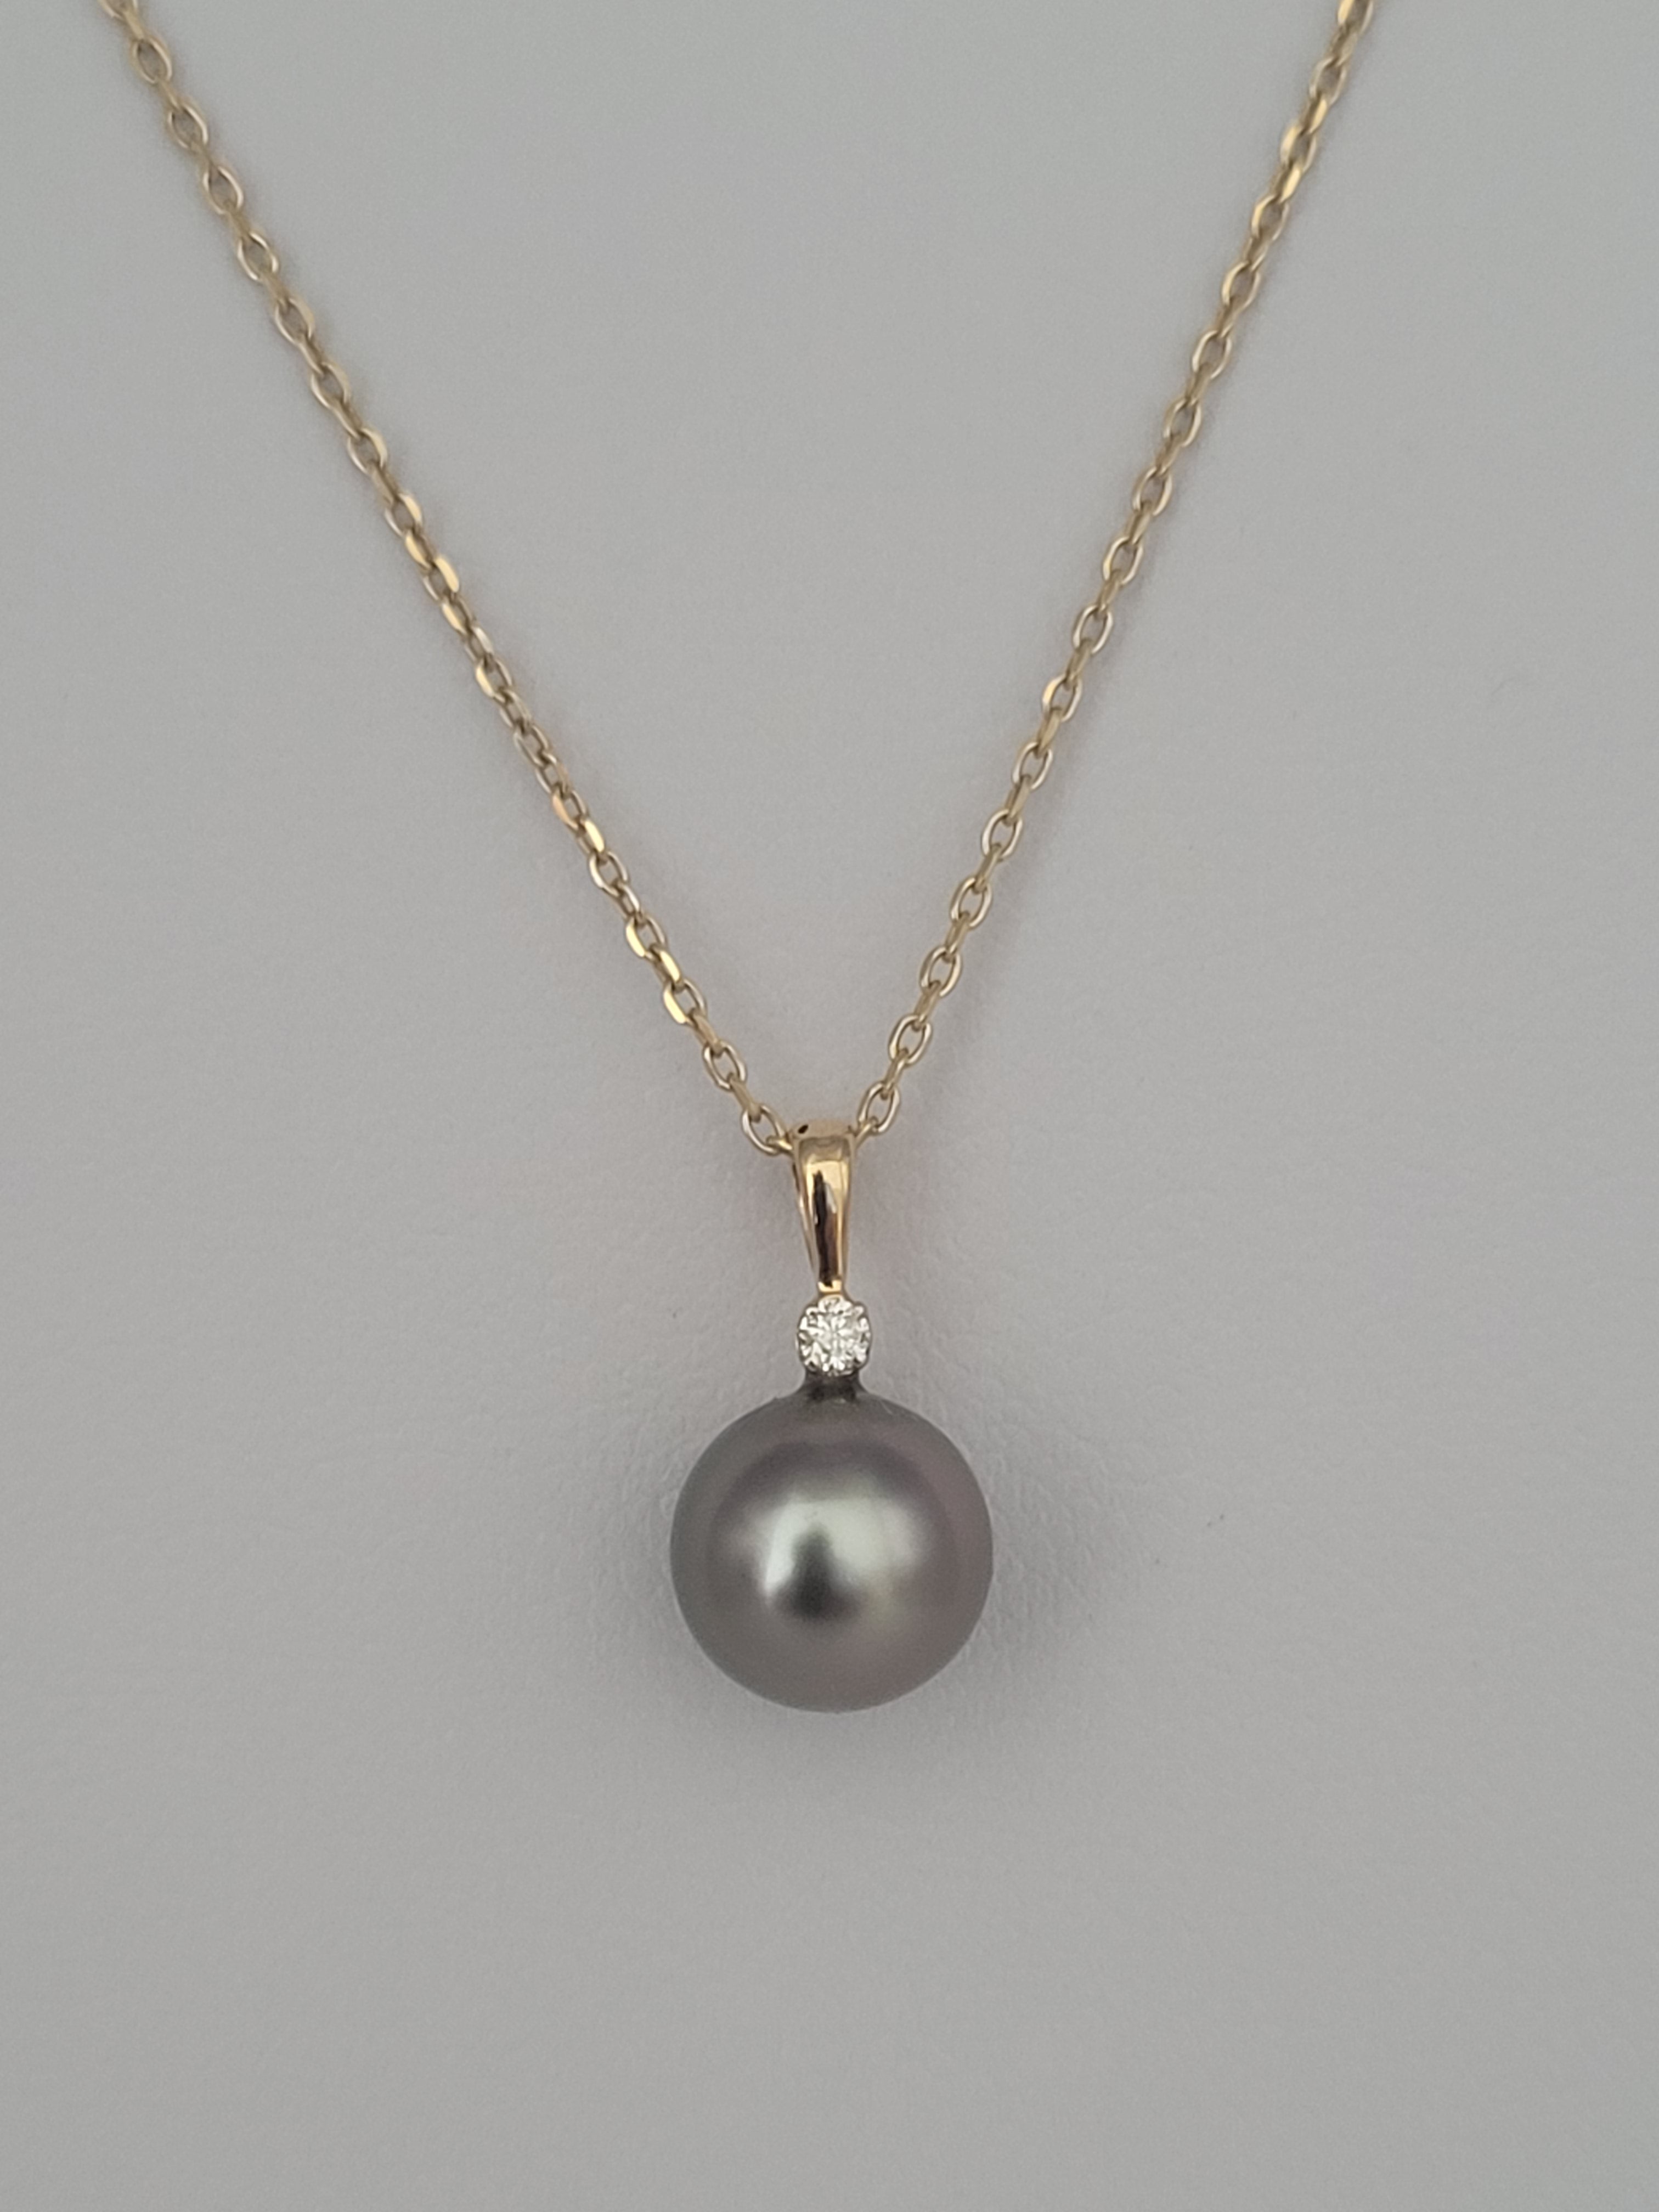 Pendant Necklace of a Tahiti Pearl 9-10 mm AAA, Diamond and 18K